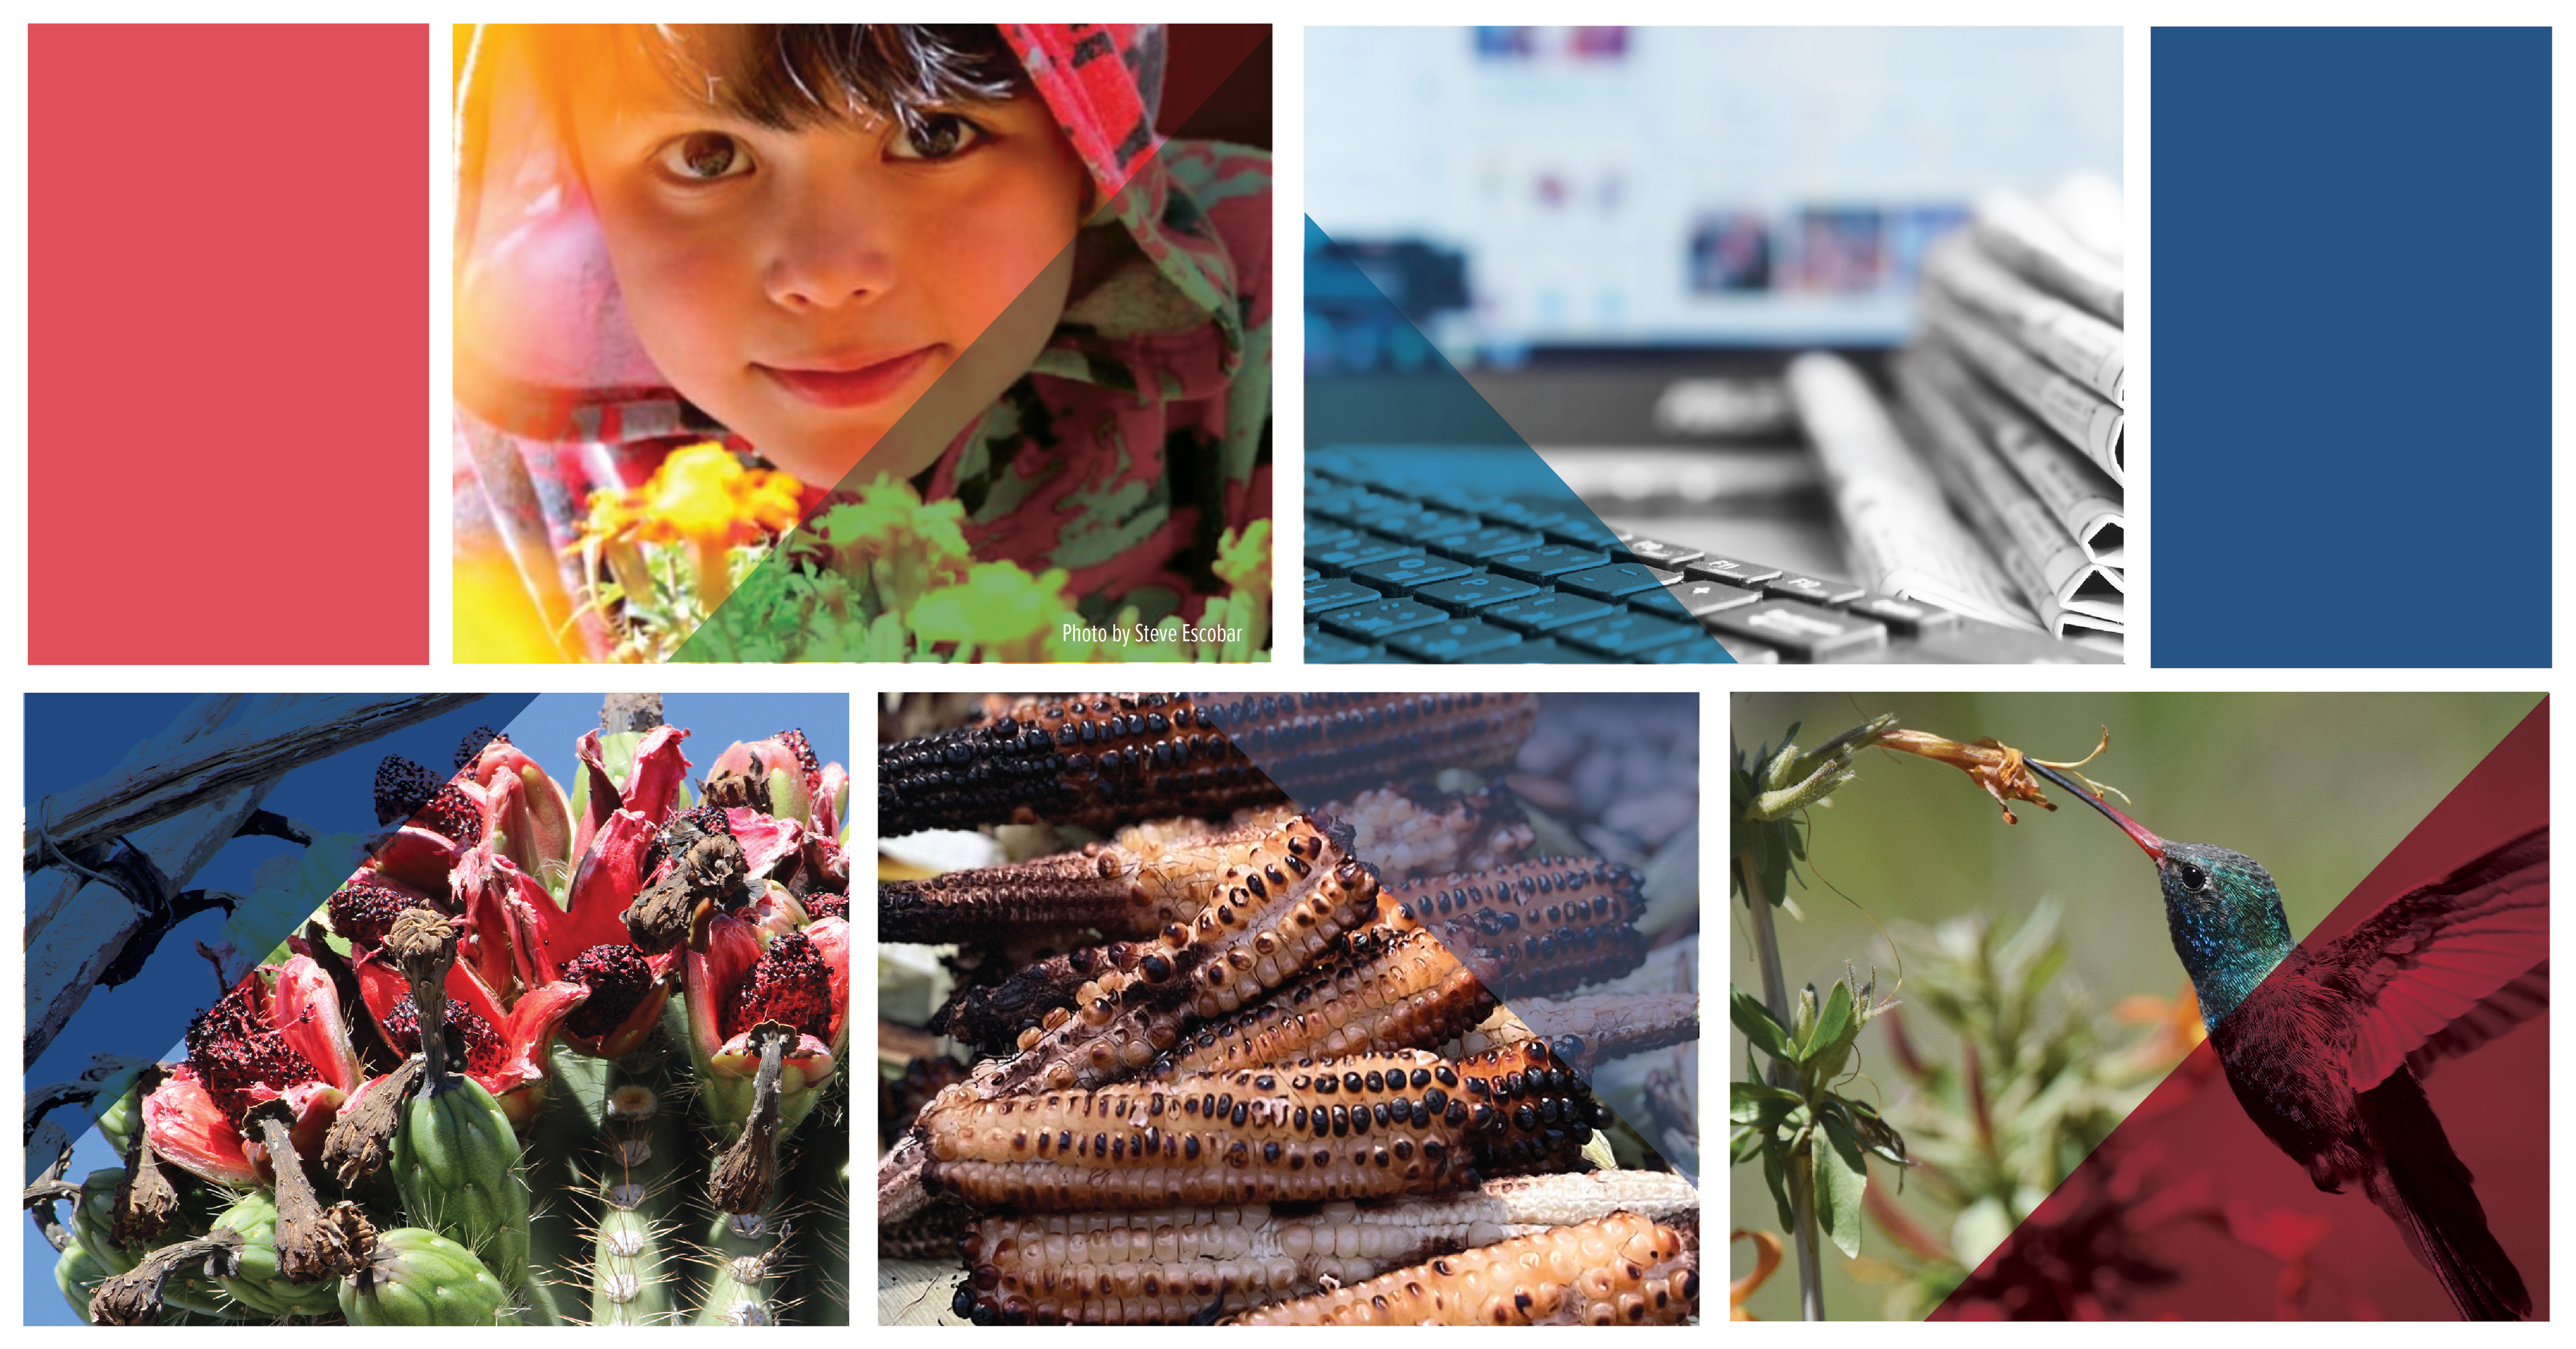 Collage of photos including a child with a flower, newspapers, blooming cacti, cooked corn, and a hummingbird eating from a flower.